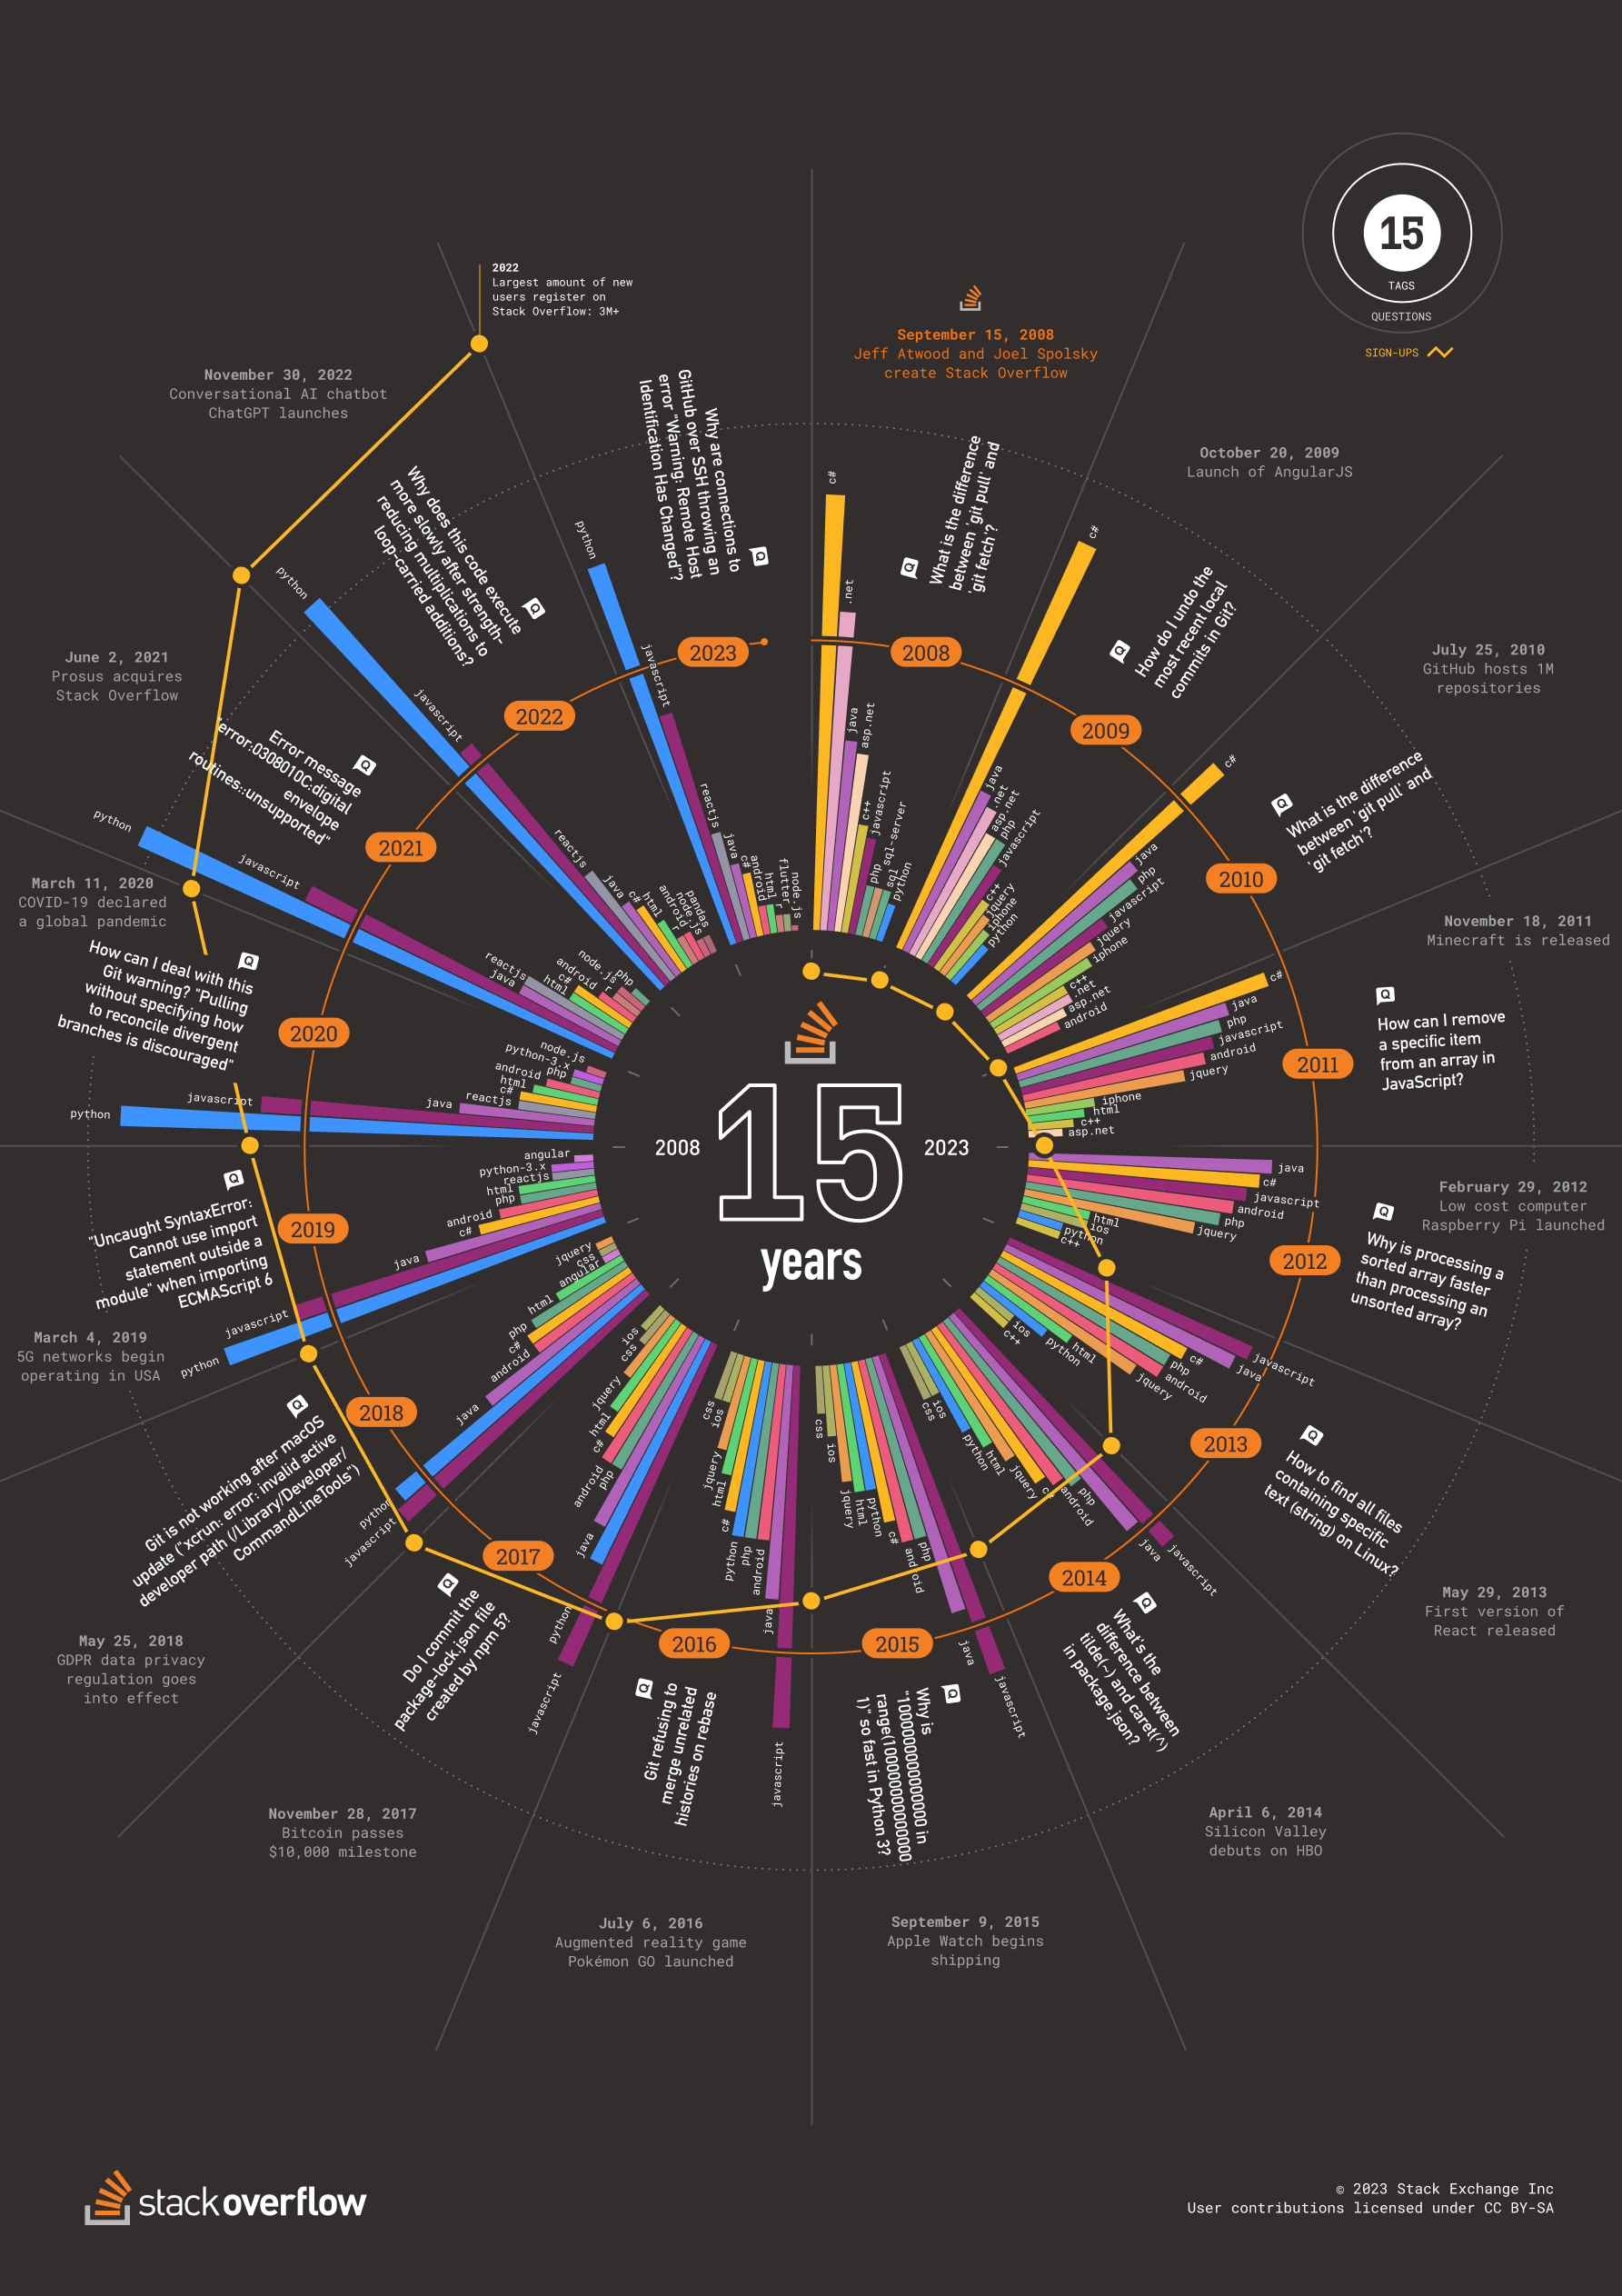 An infographic showing data from stackoverflow.com from the last 15 years